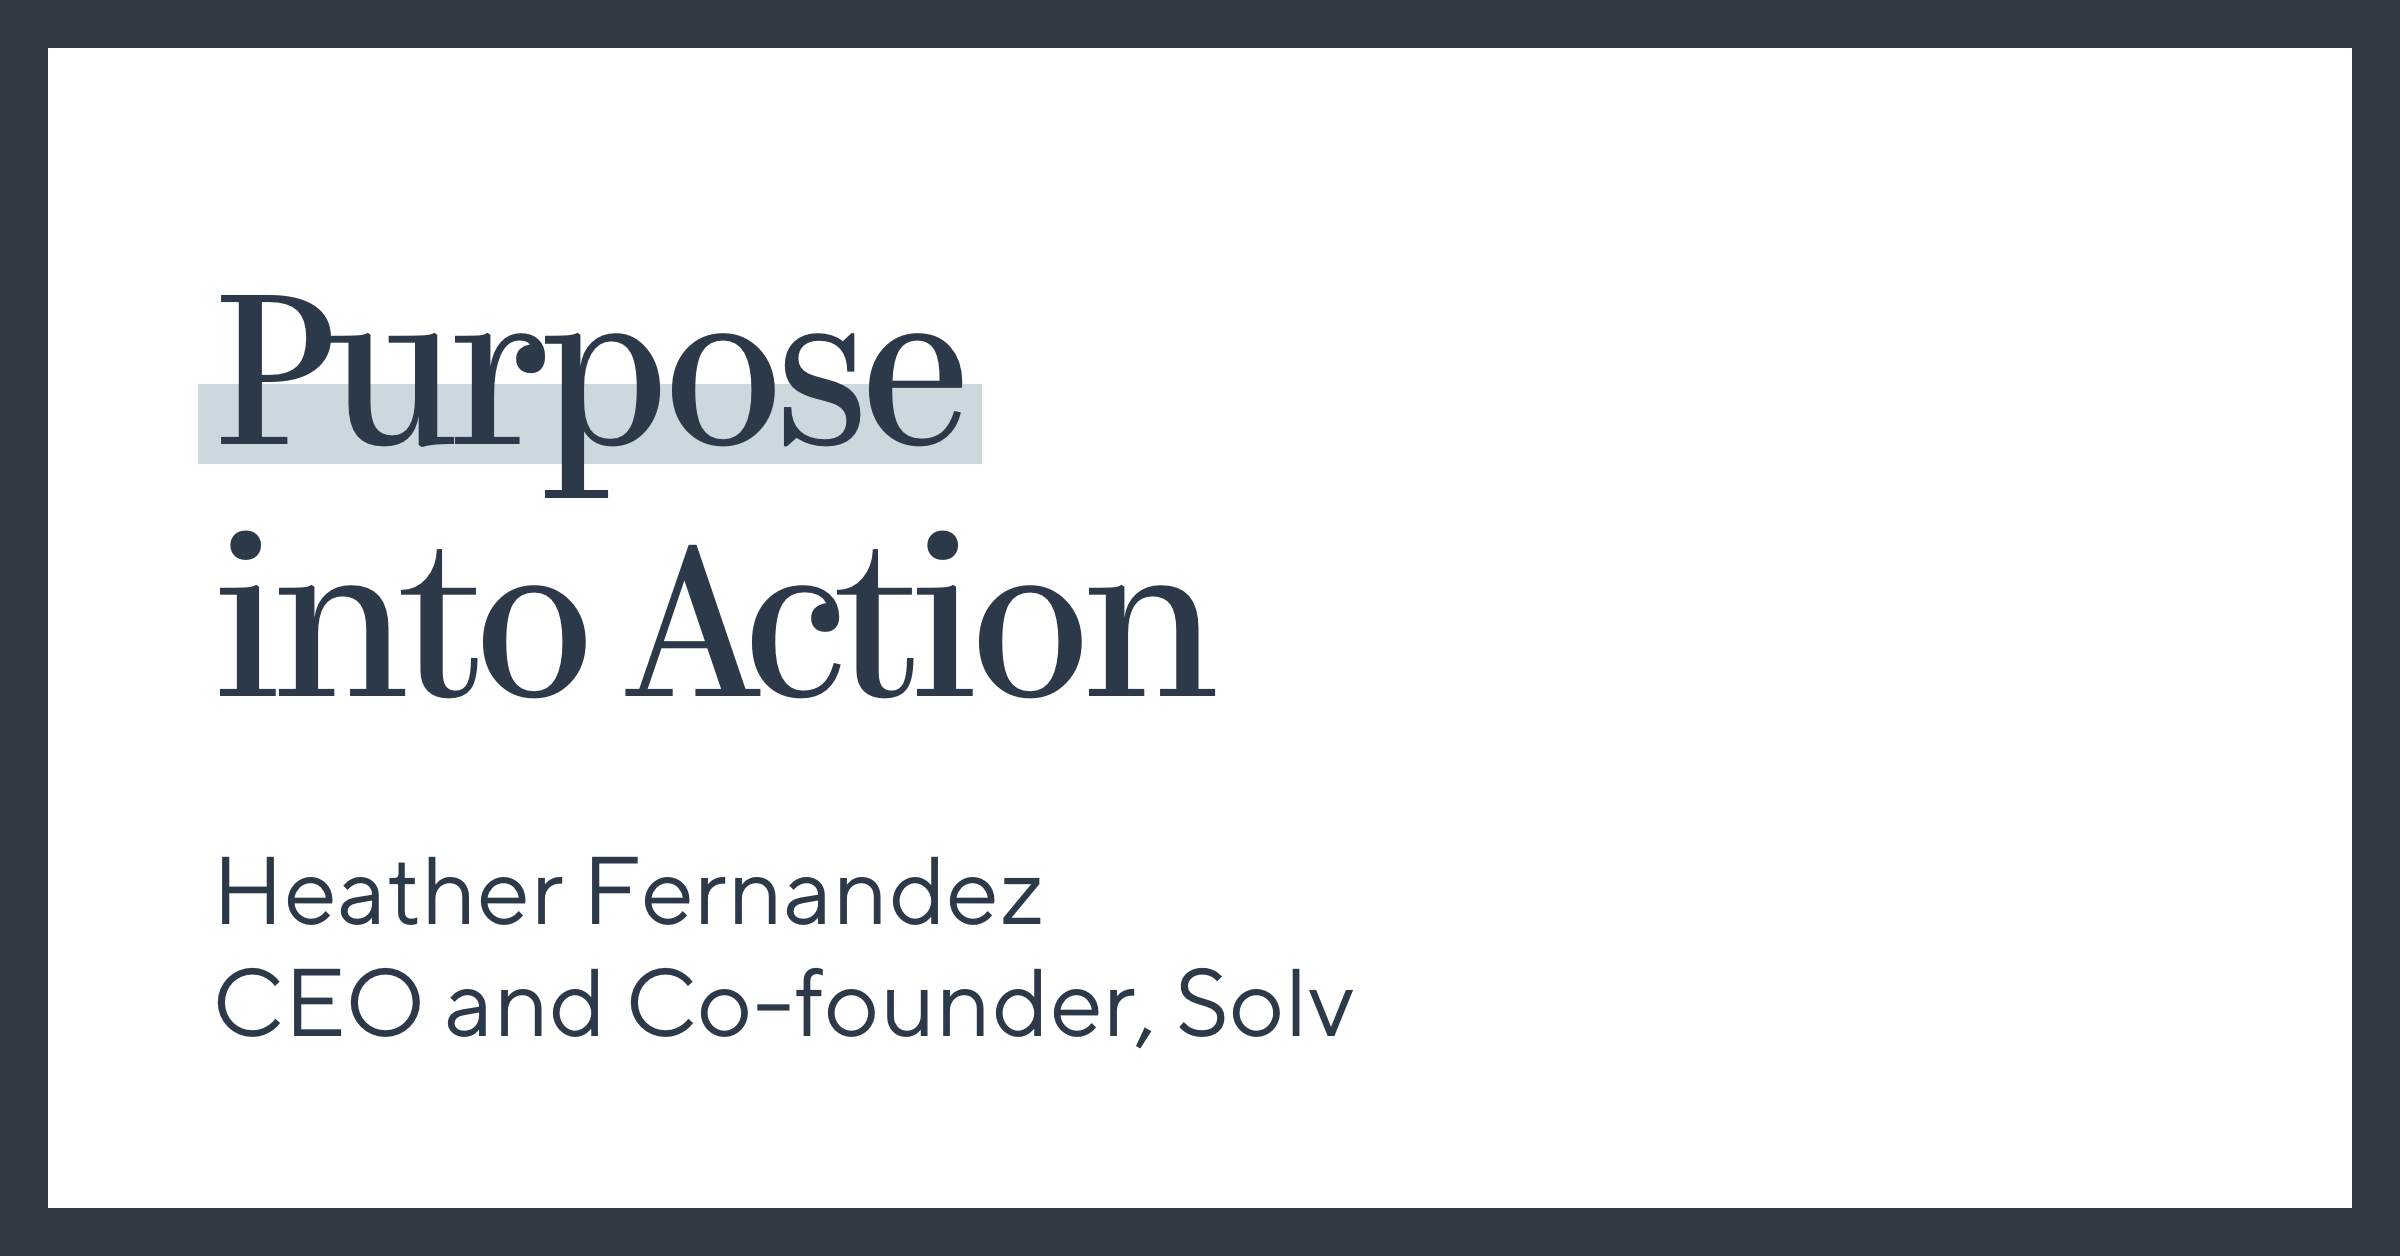 Purpose into Action